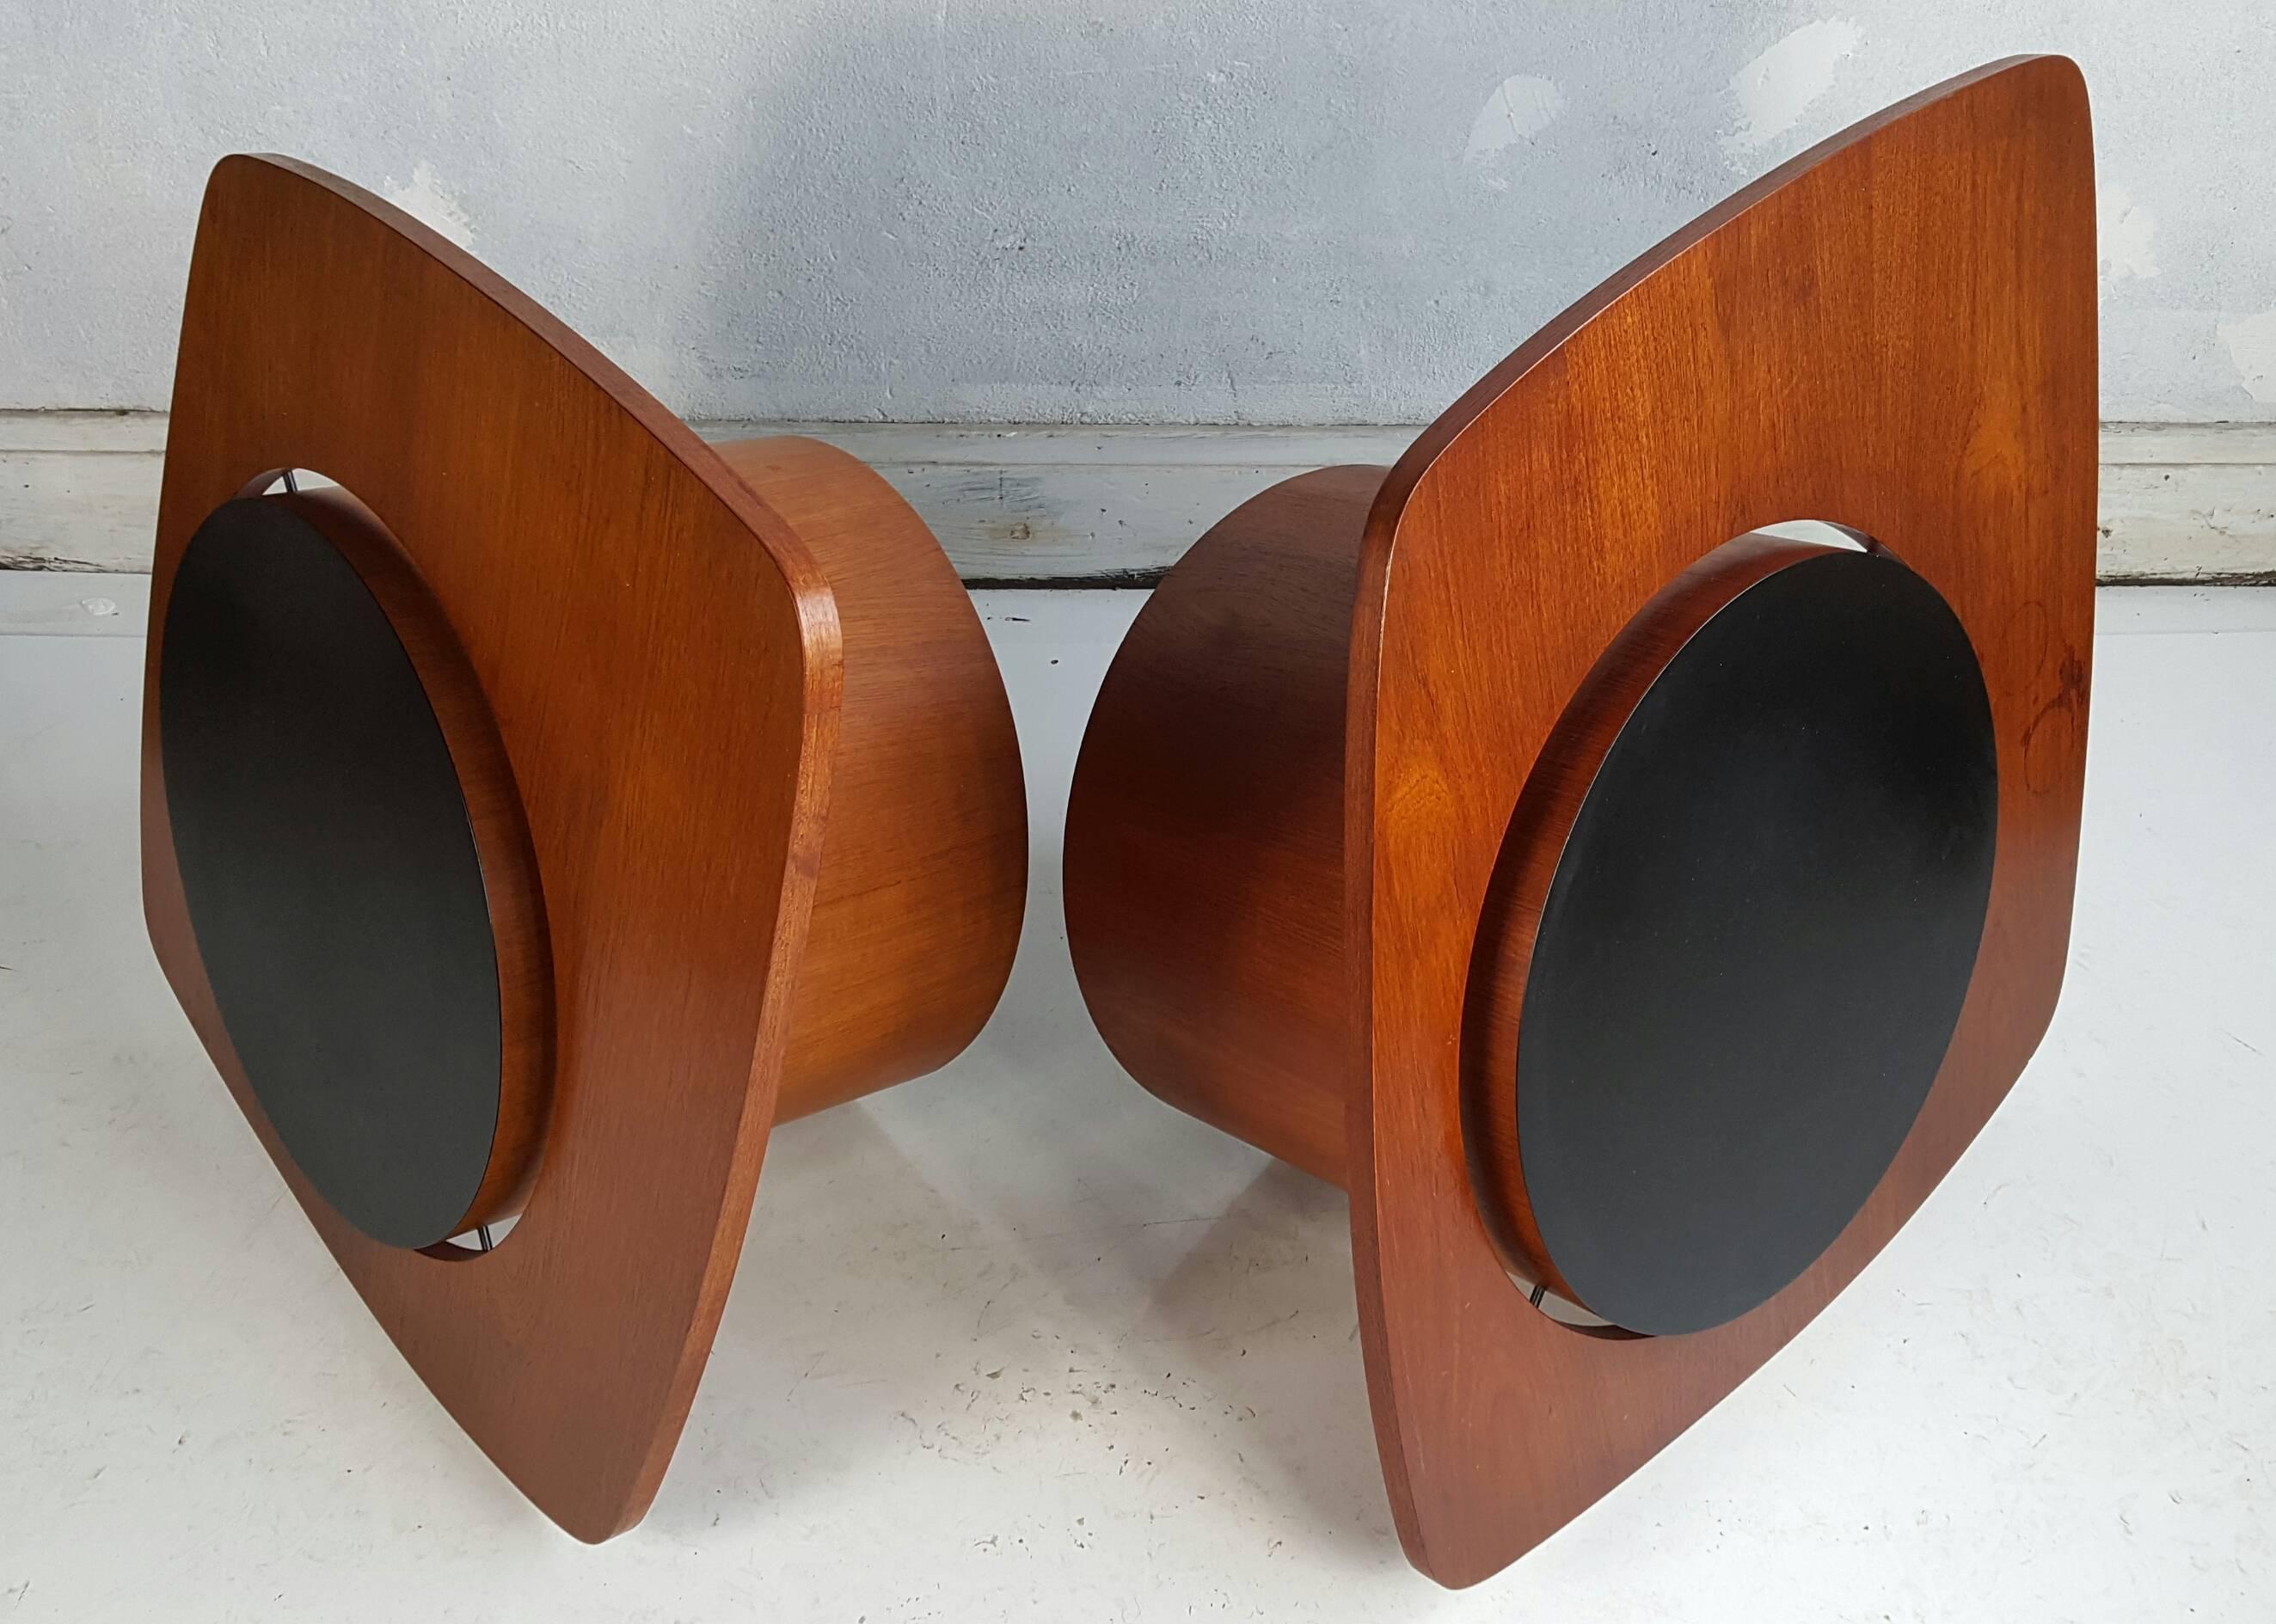 Classic pair of Canadian modern Space Age design, rare and seldom seen oversized version, originally planned as a designed for display at Expo 1967 in Montreal, these pieces did not actually go into production until 1968. Designed by R.S. Associates